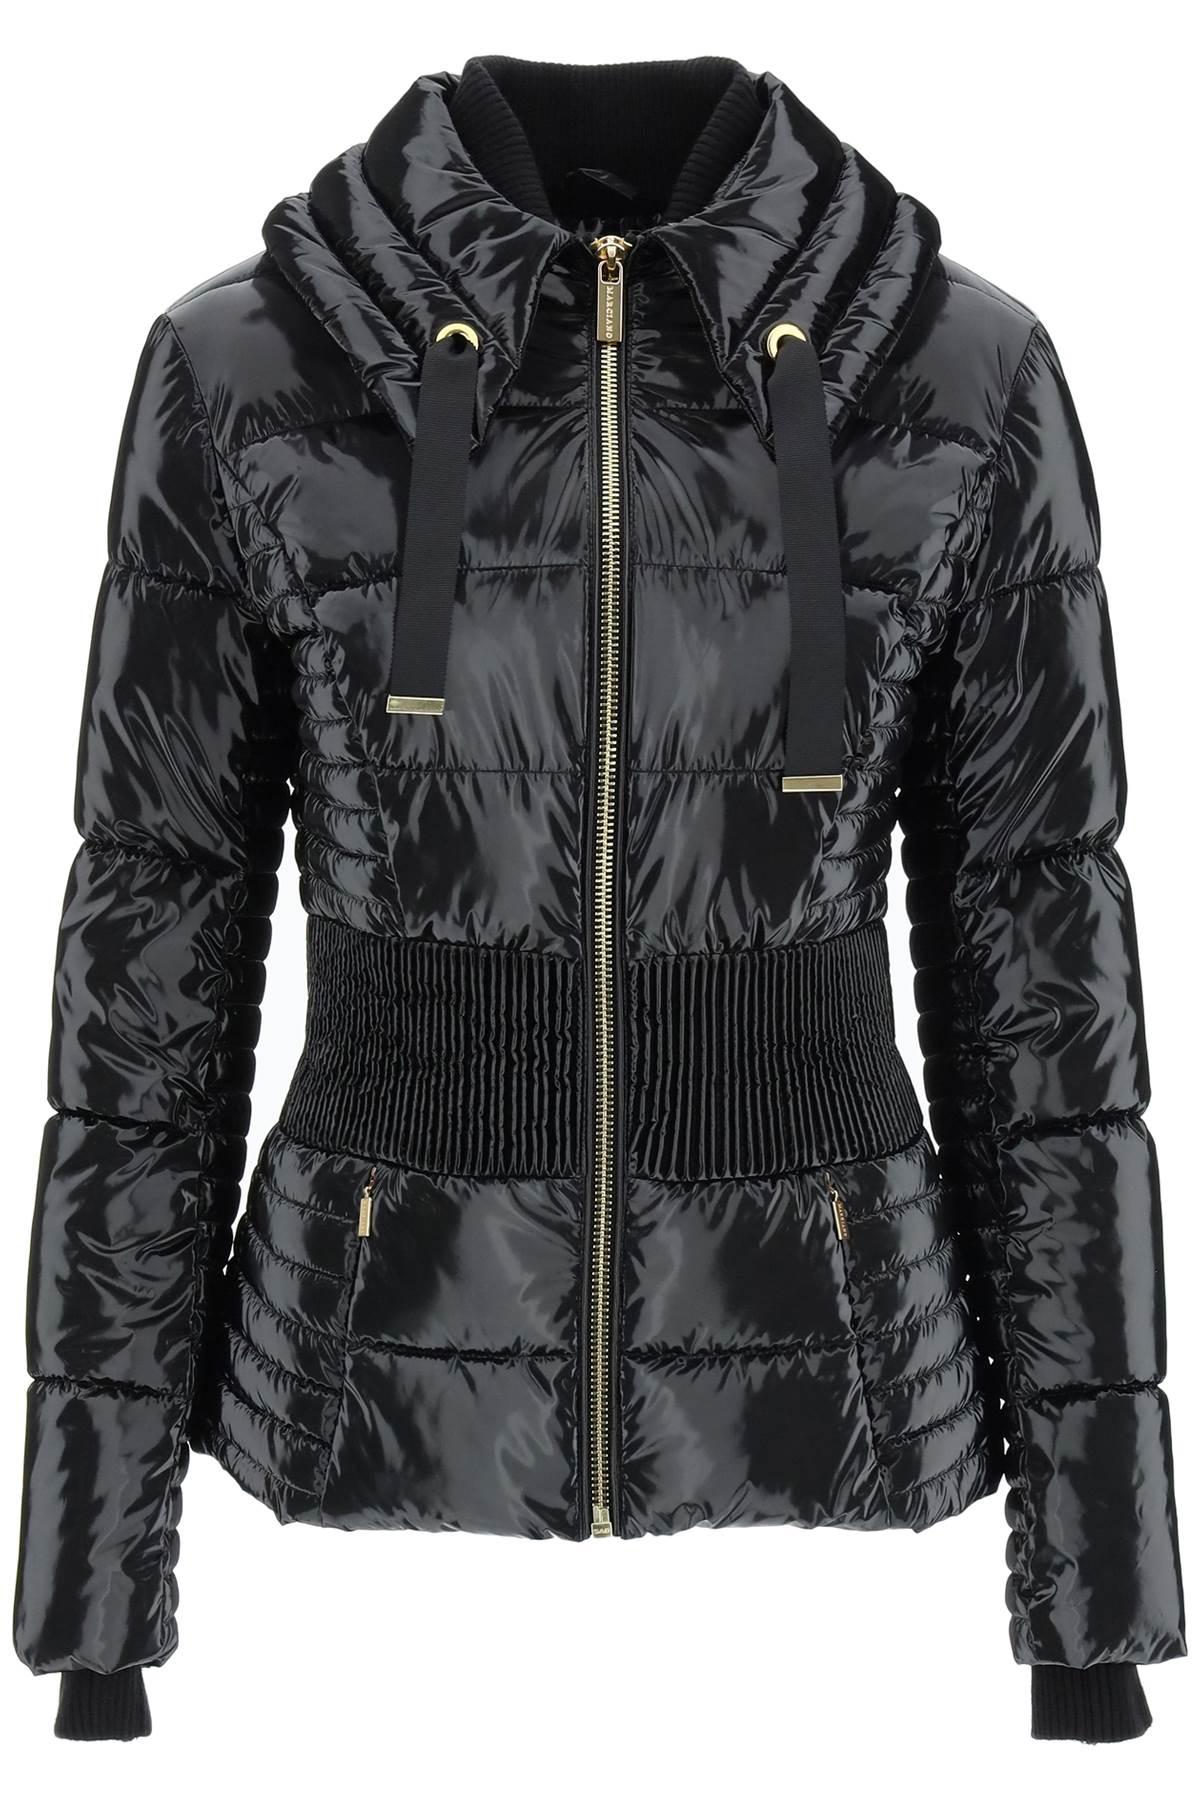 BY GUESS 'annie' Laquered Nylon Puffer Jacket in Black | Lyst